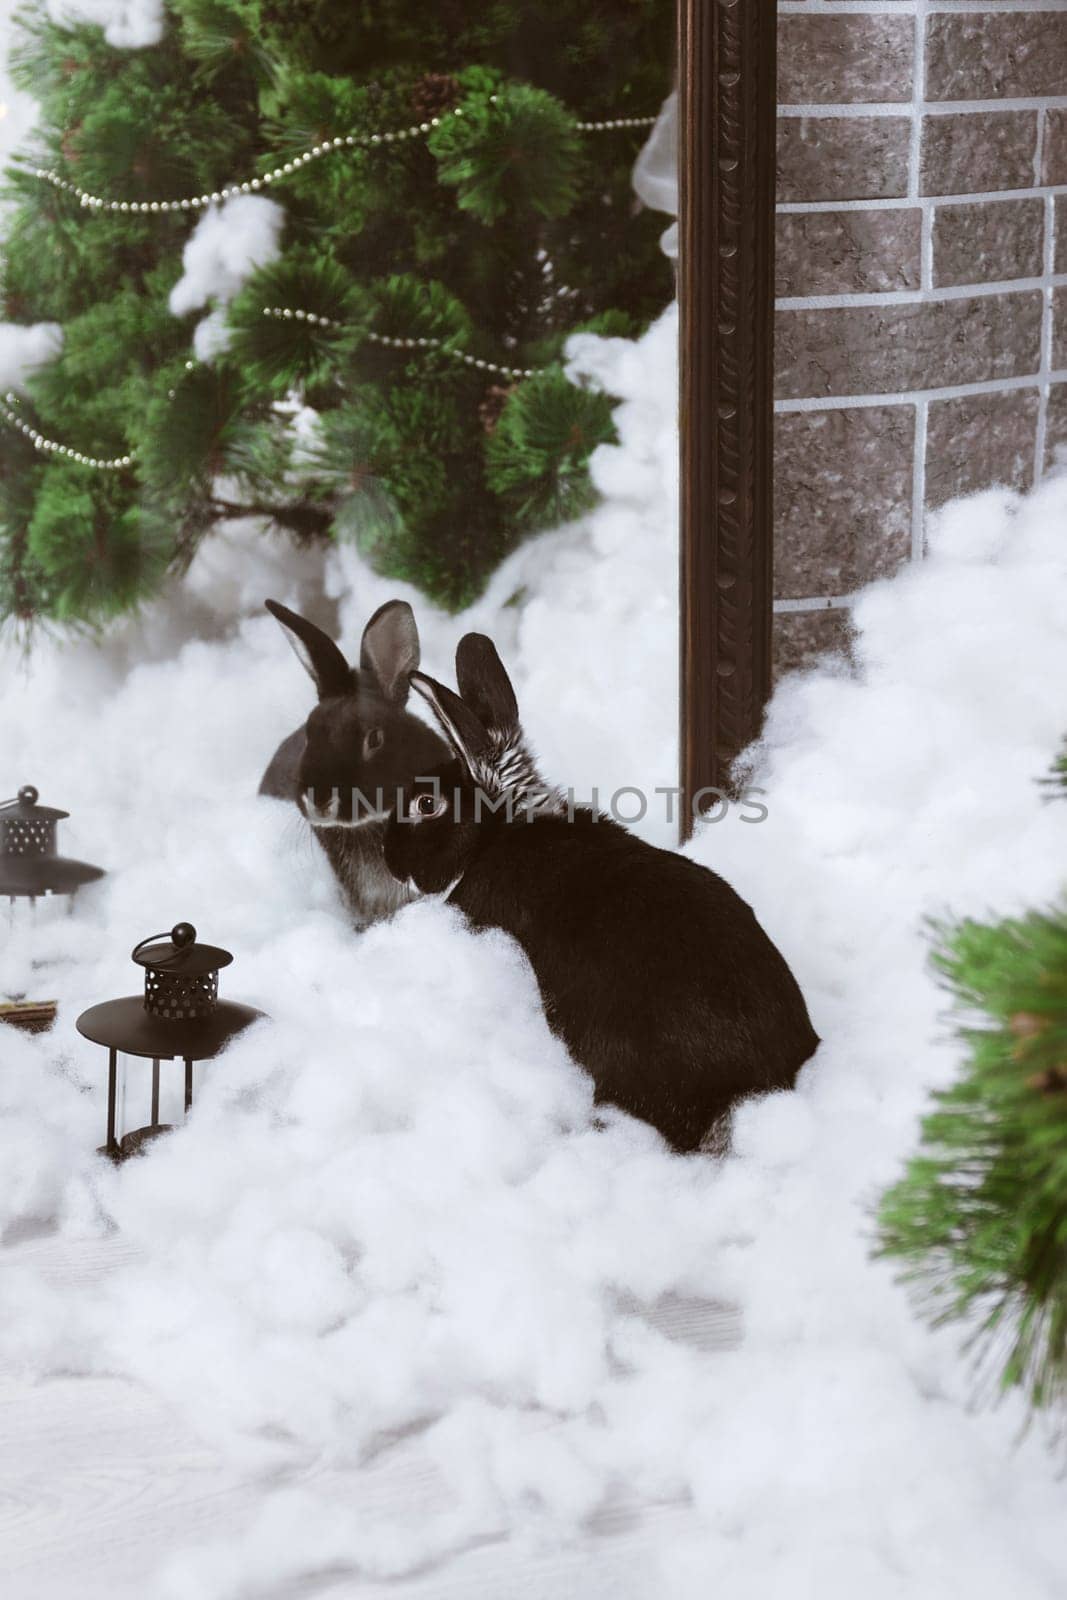 A black rabbit in artificial snow looks in the mirror. The symbol of the year in snow decorations